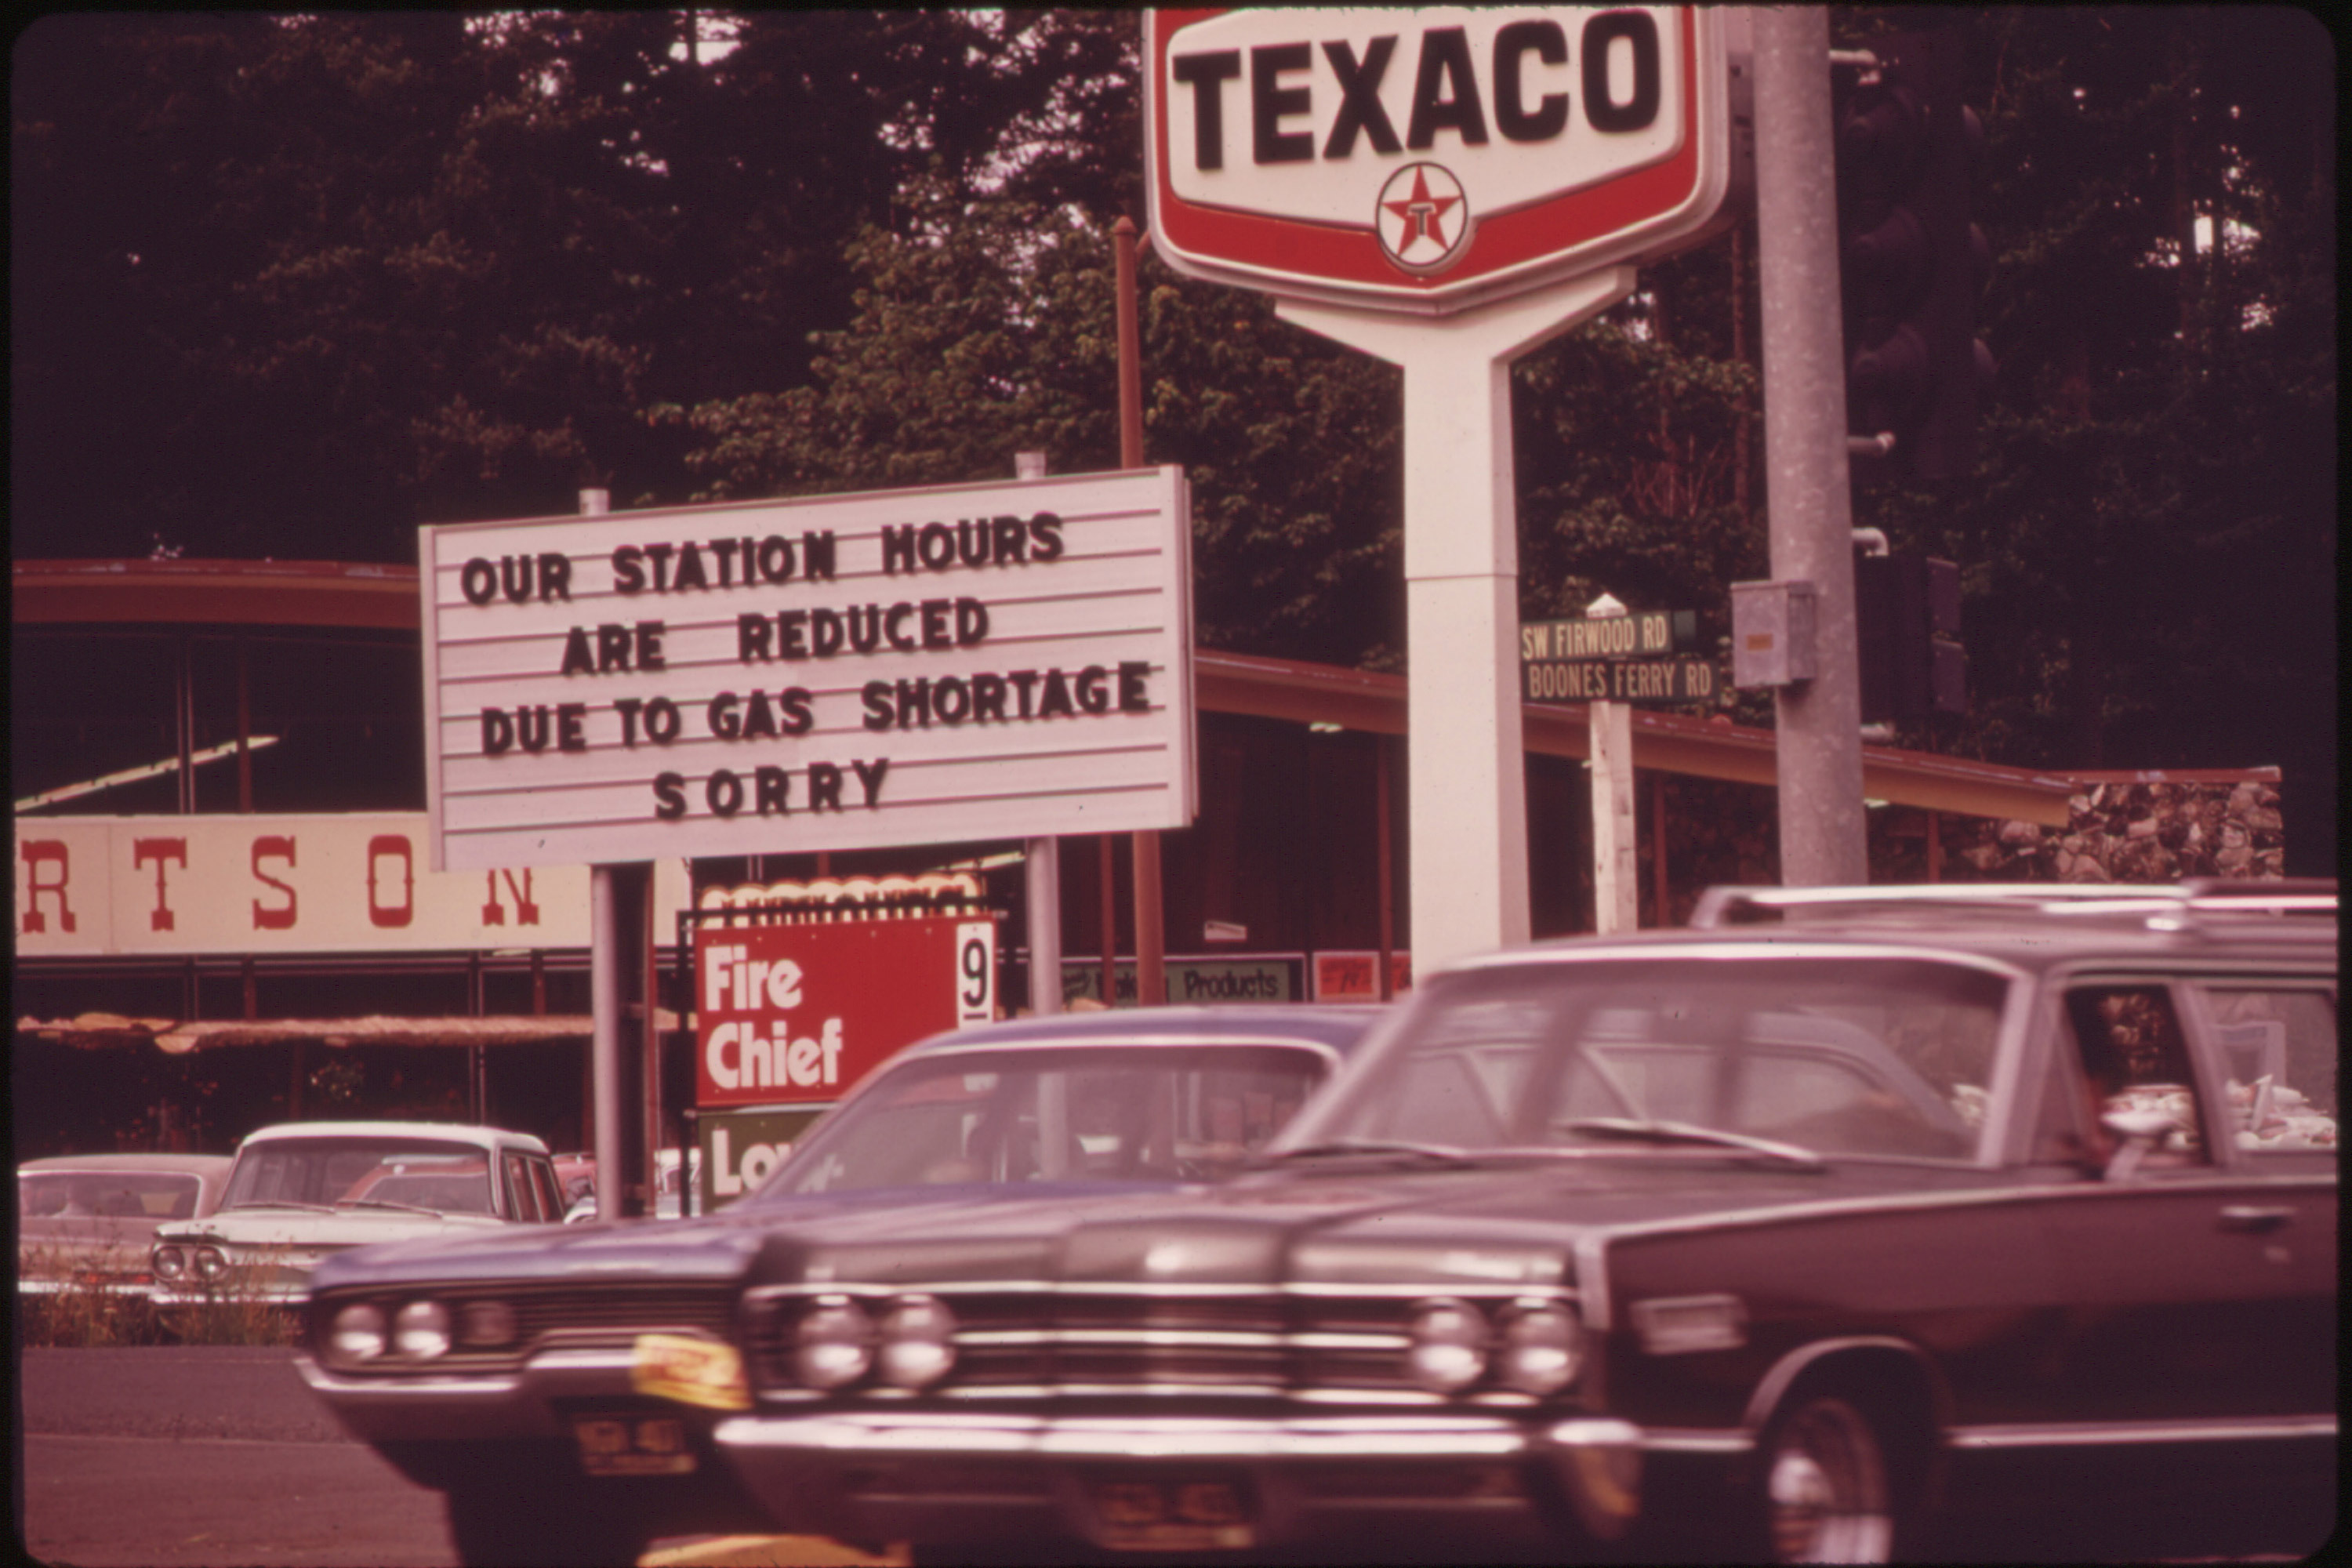 One of many service stations in the Portland, Ore., area carrying signs reflecting the gasoline shortage, in June 1973.&nbsp;